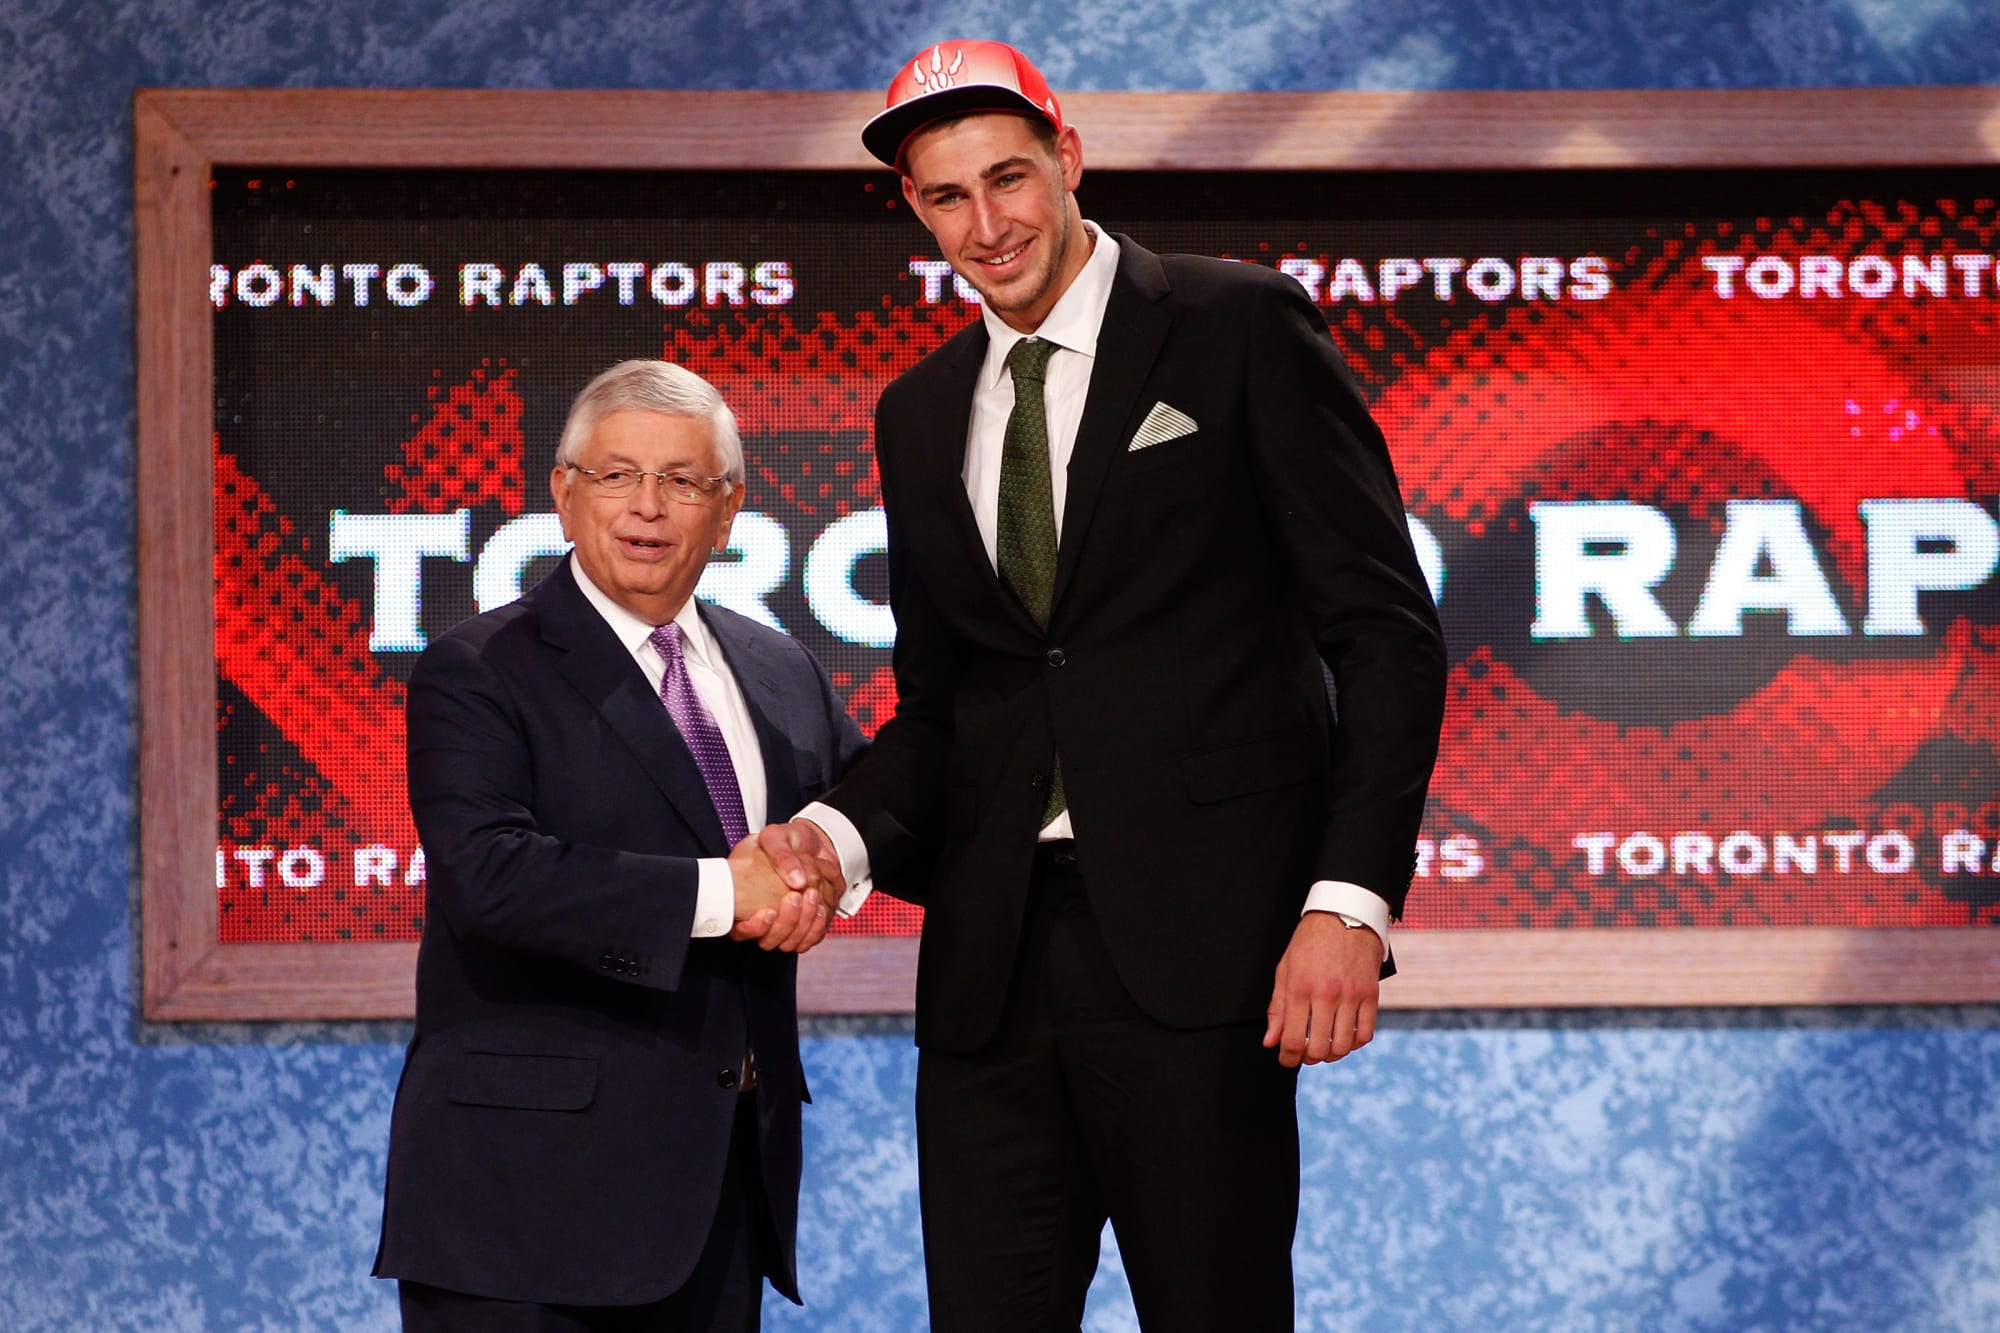 Toronto Raptors Every Top 10 NBA Draft pick in franchise history, ranked